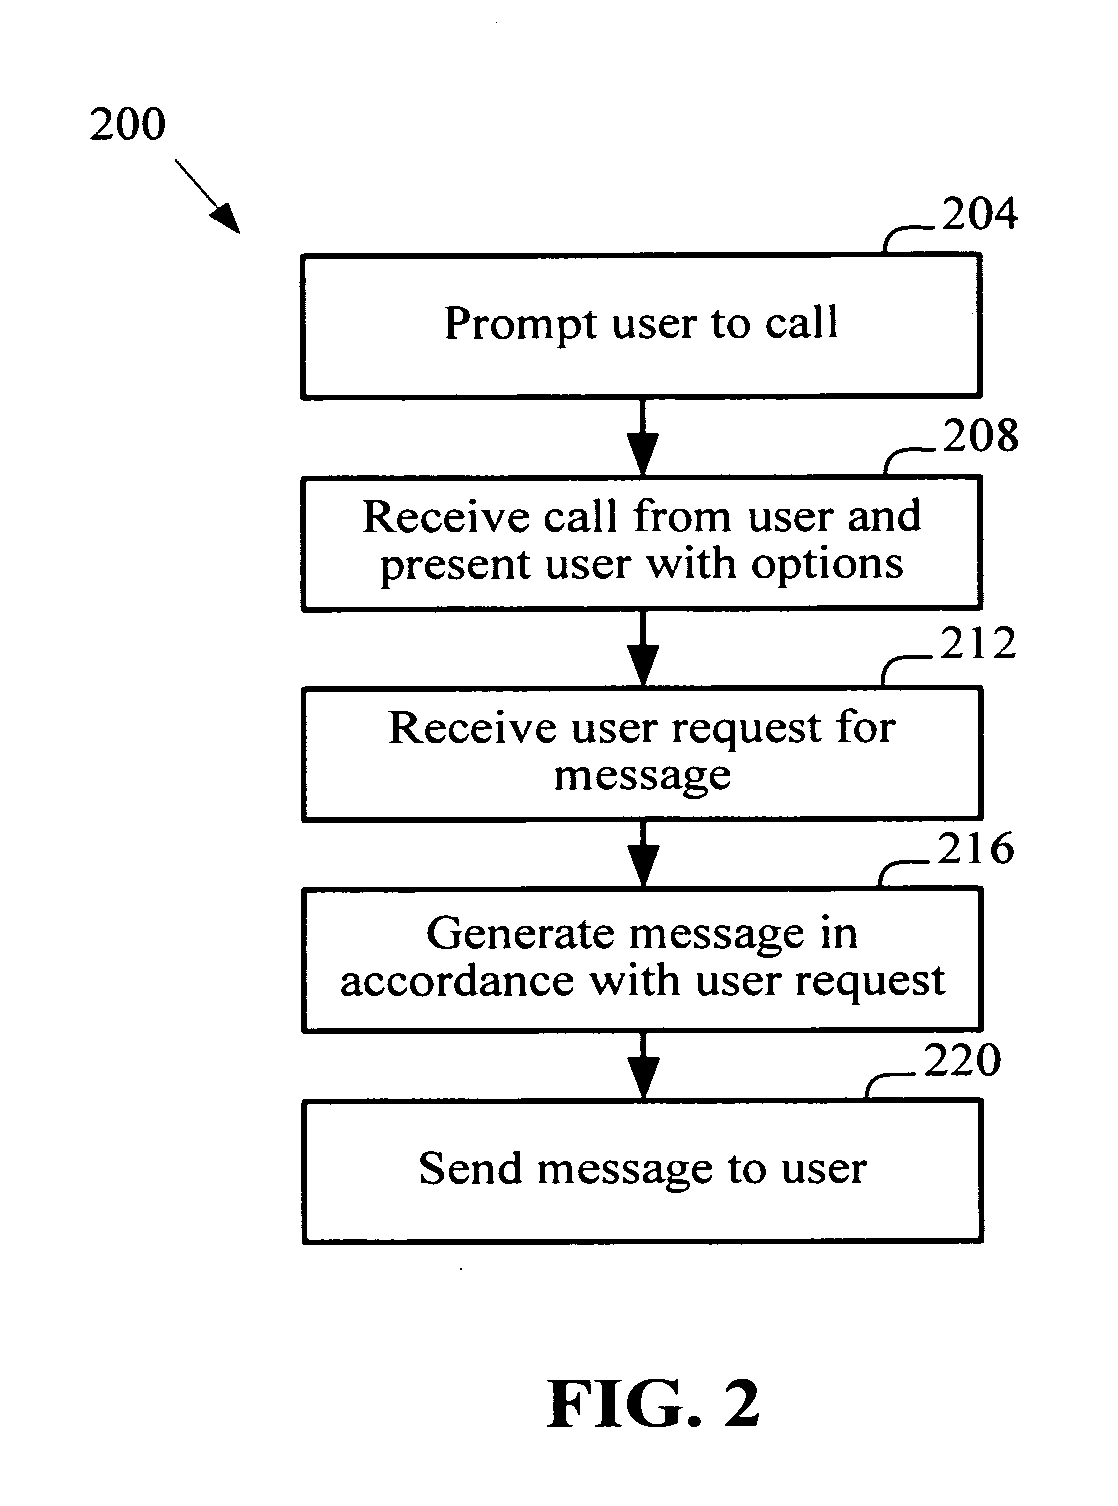 Interactive mobile messaging system